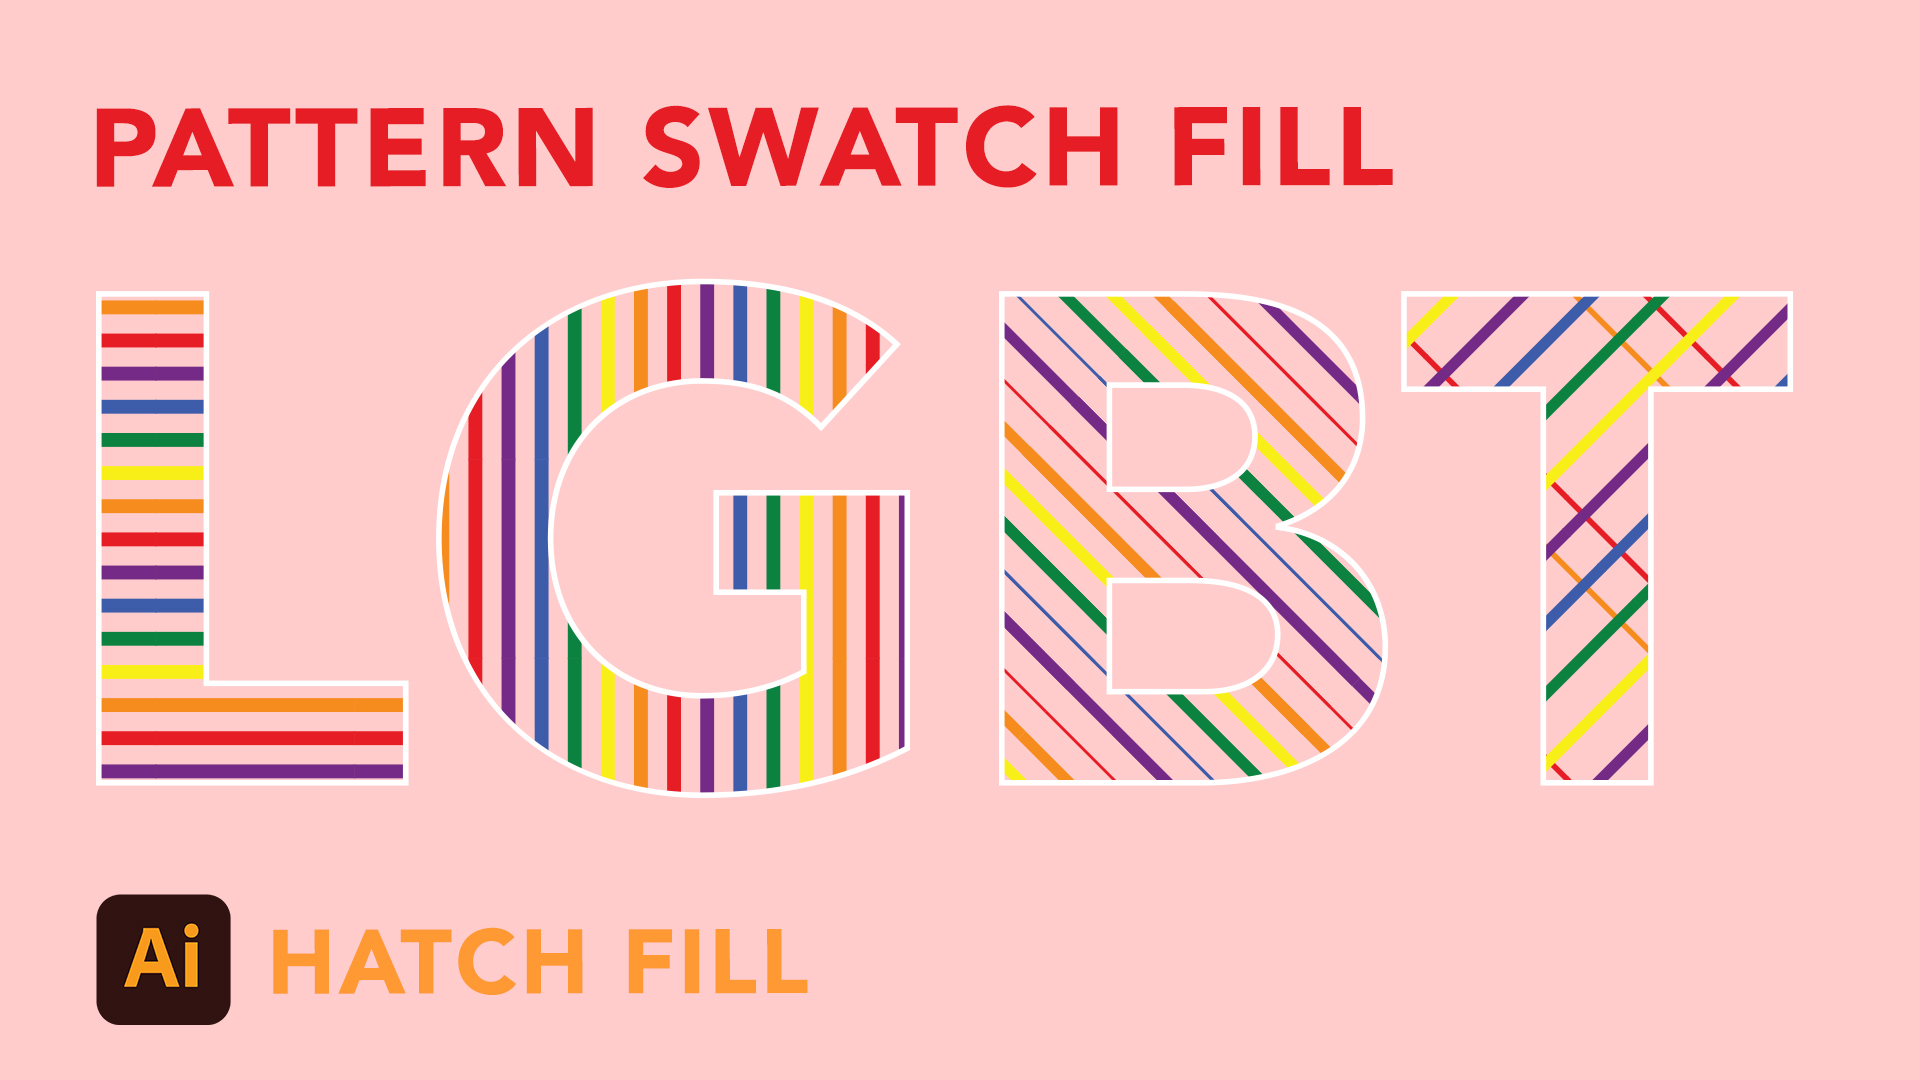 Pattern Swatches Illustrator, Illustrator Hatch Fill Effect with Rainbow Colors